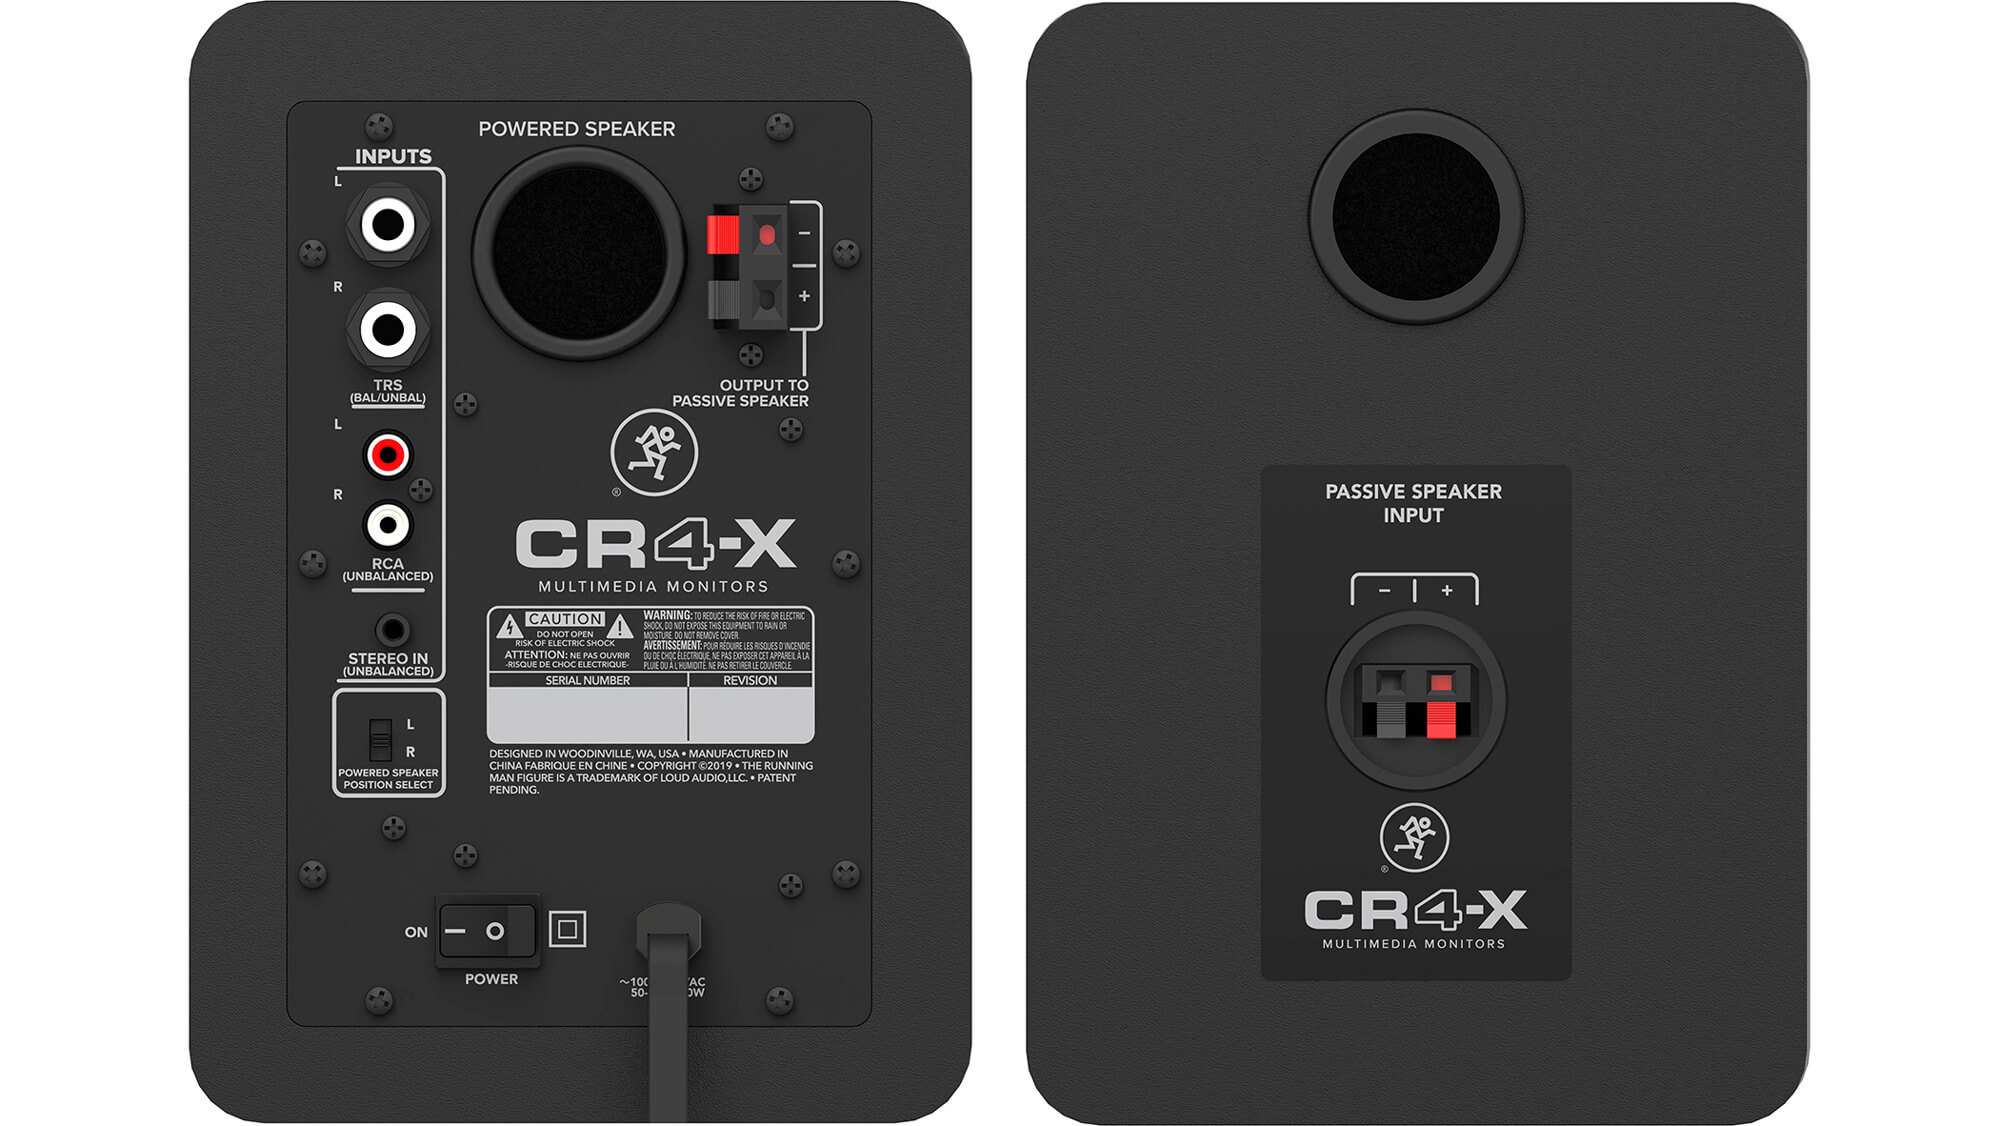 The CR4-X monitors have both TRS and RCA inputs, but they have no tuning options. The rear bass port allows for low-end projection, but you